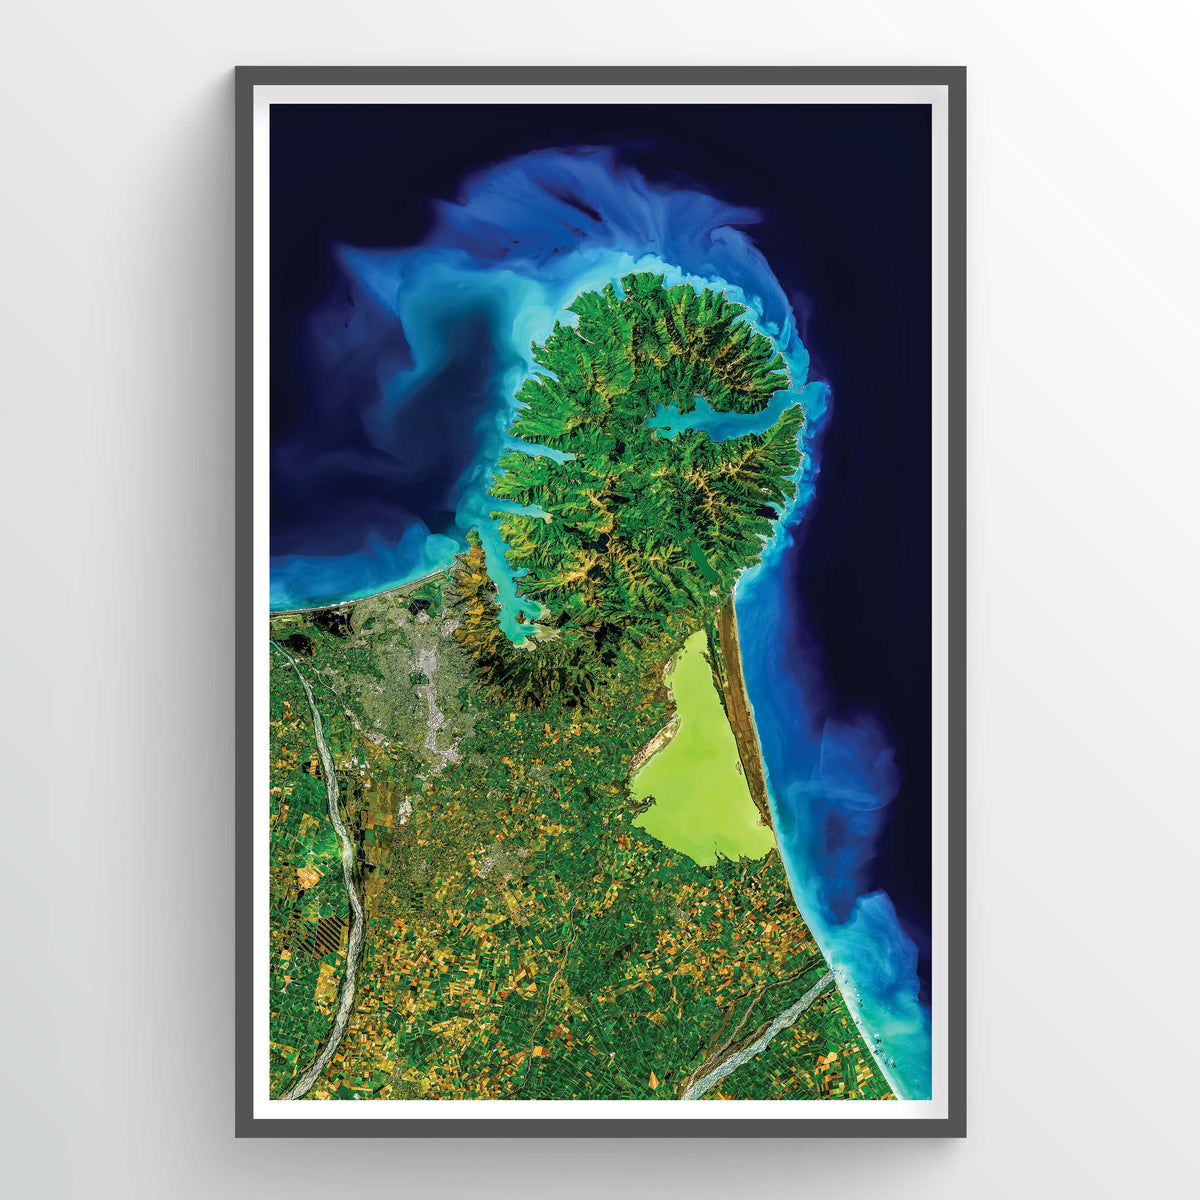 Banks Peninsula Earth Photography - Art Print - Point Two Design